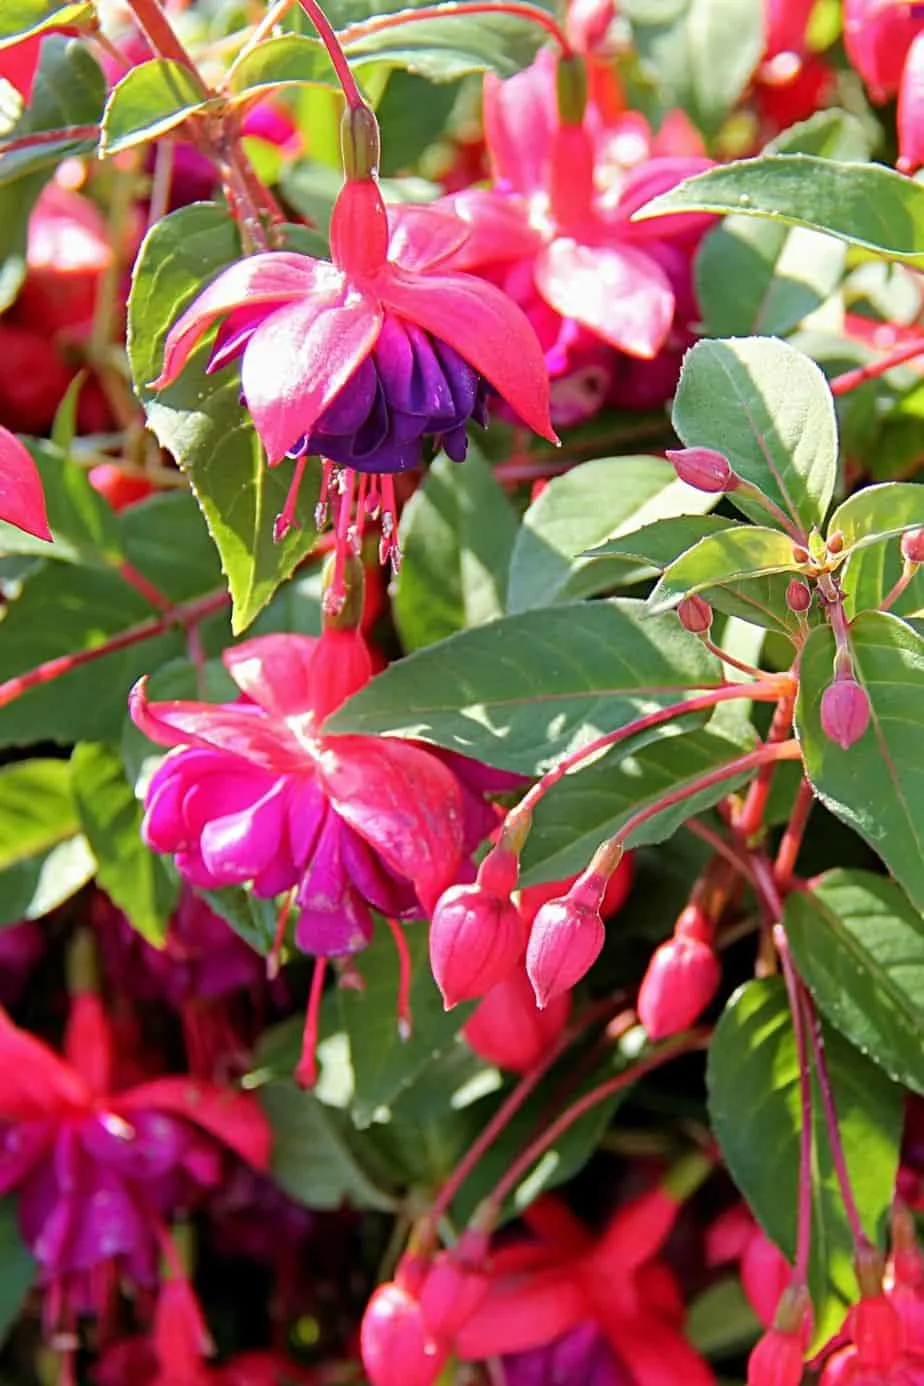 Fuchsia is a top plant choice for privacy if your garden's not well-lit